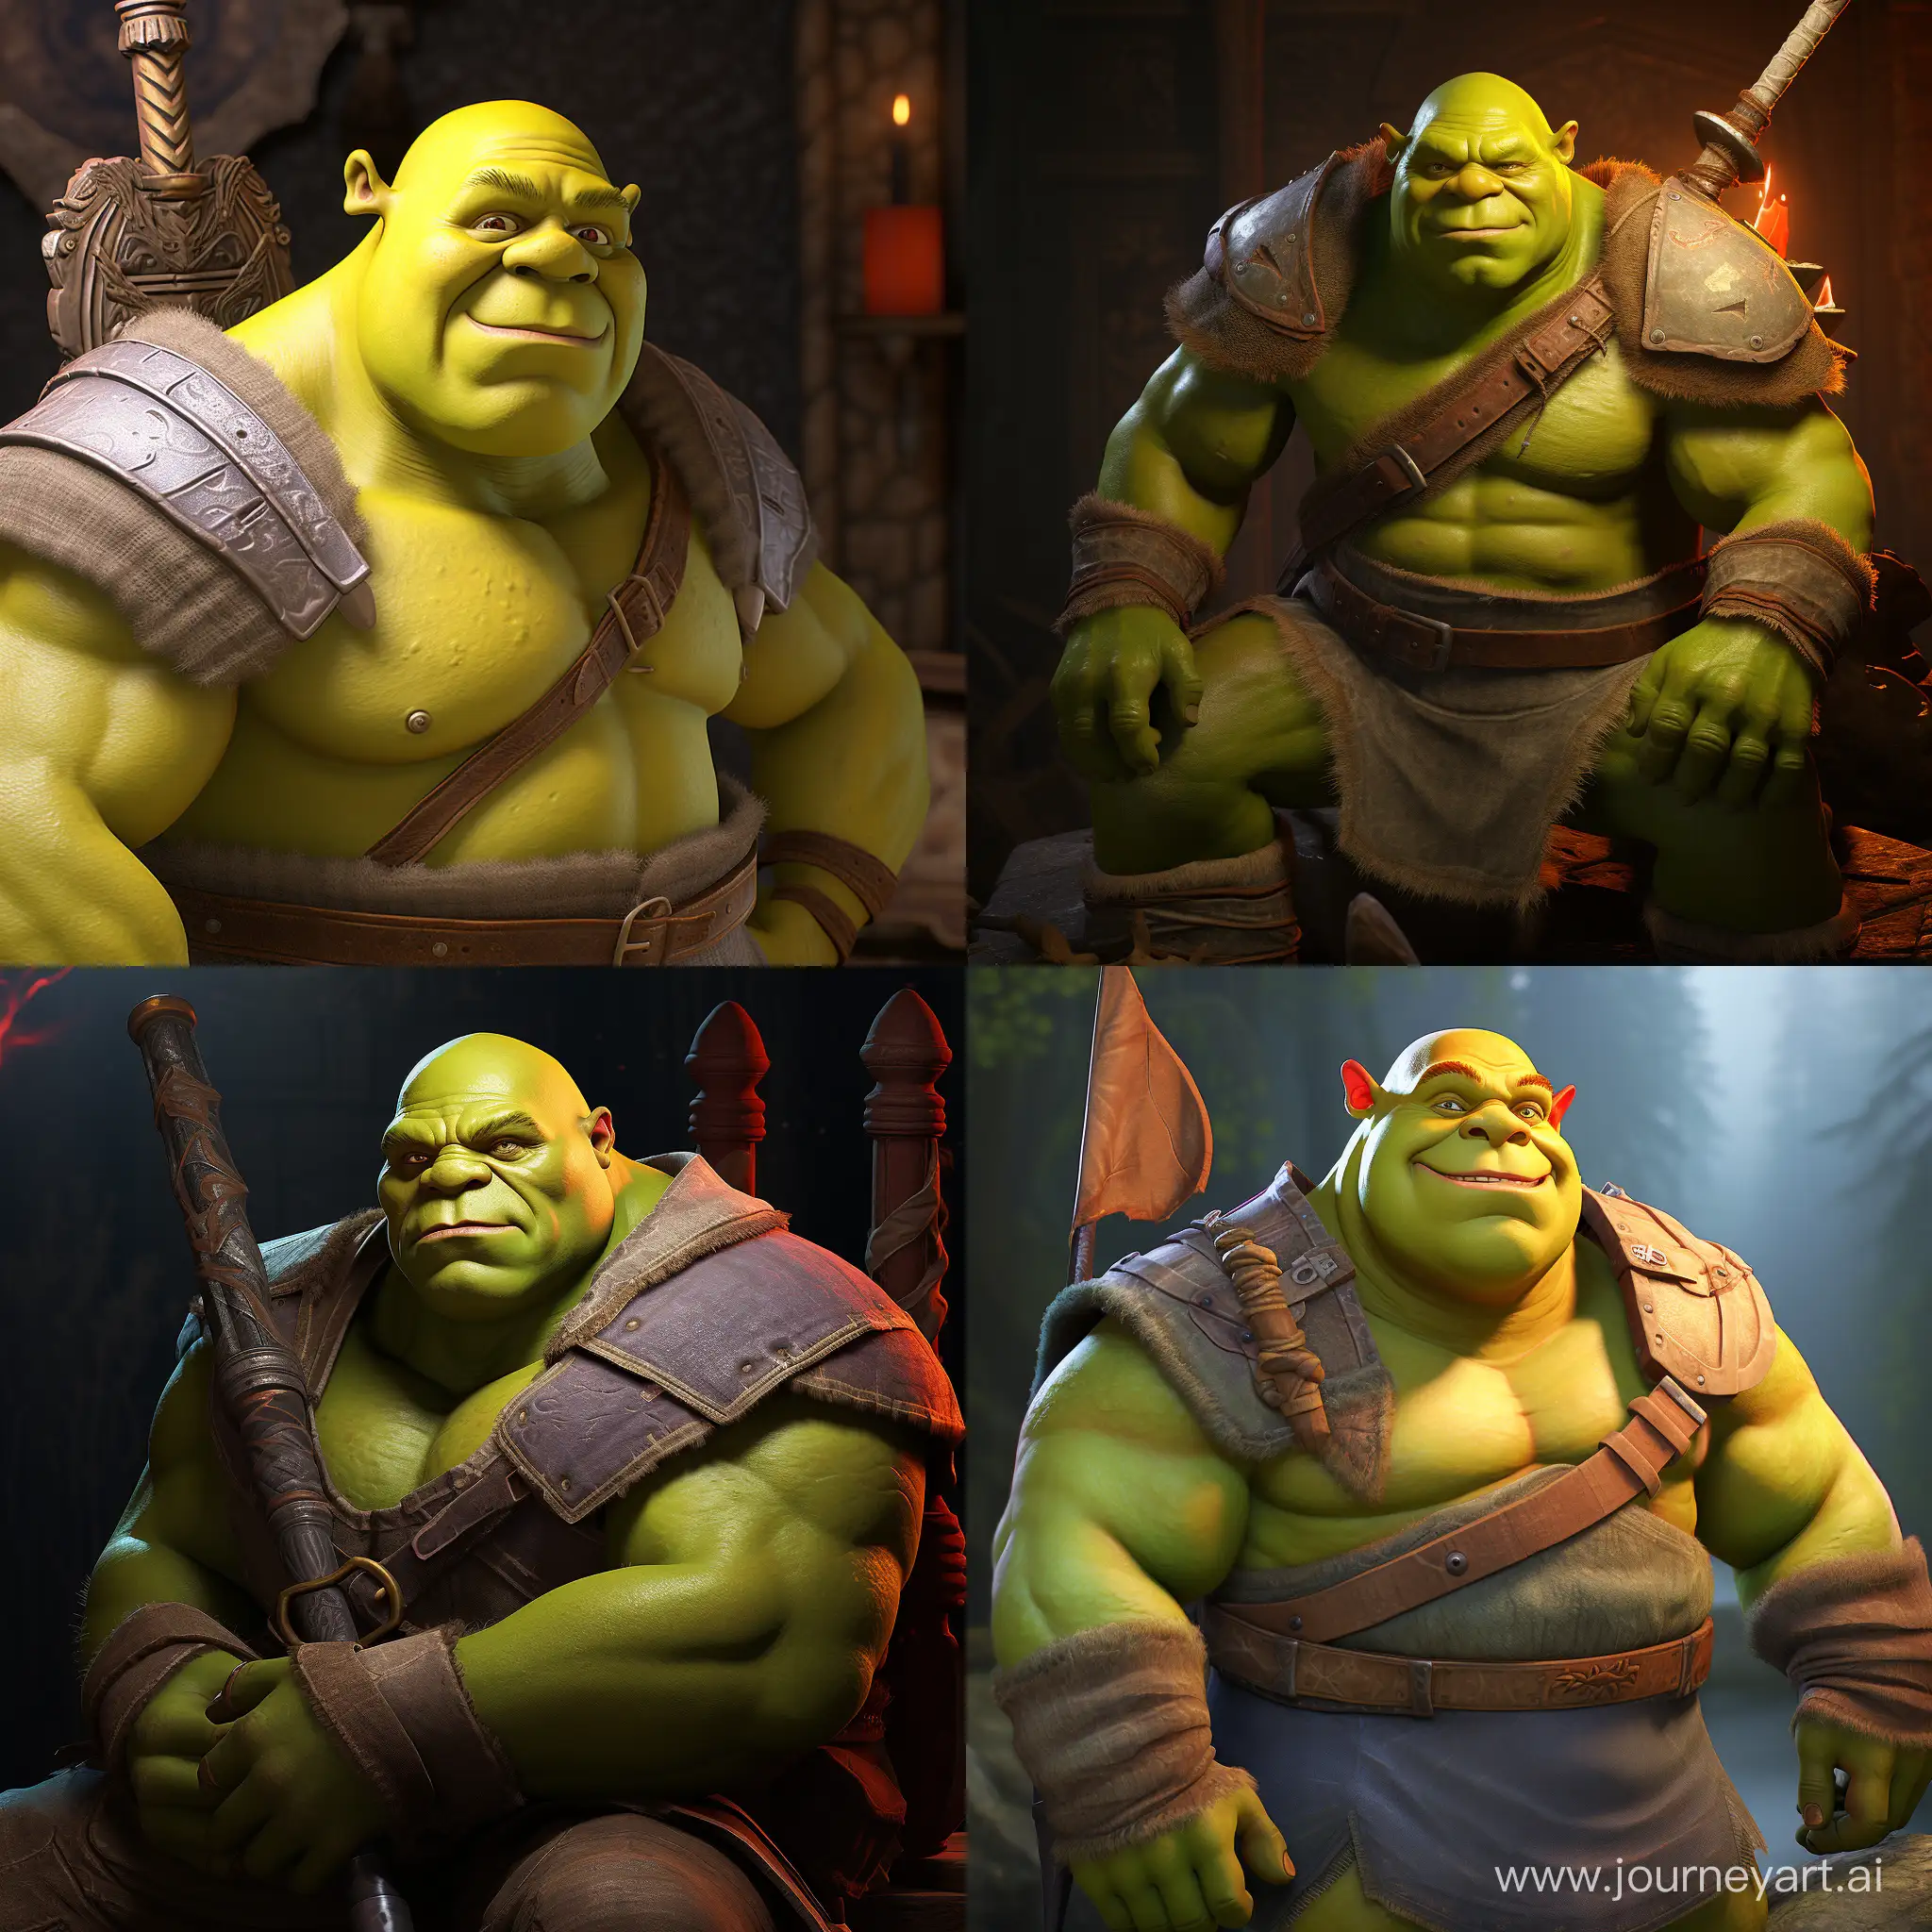 Shrek-Engages-in-Epic-Dota-2-Battle-with-Unique-Settings